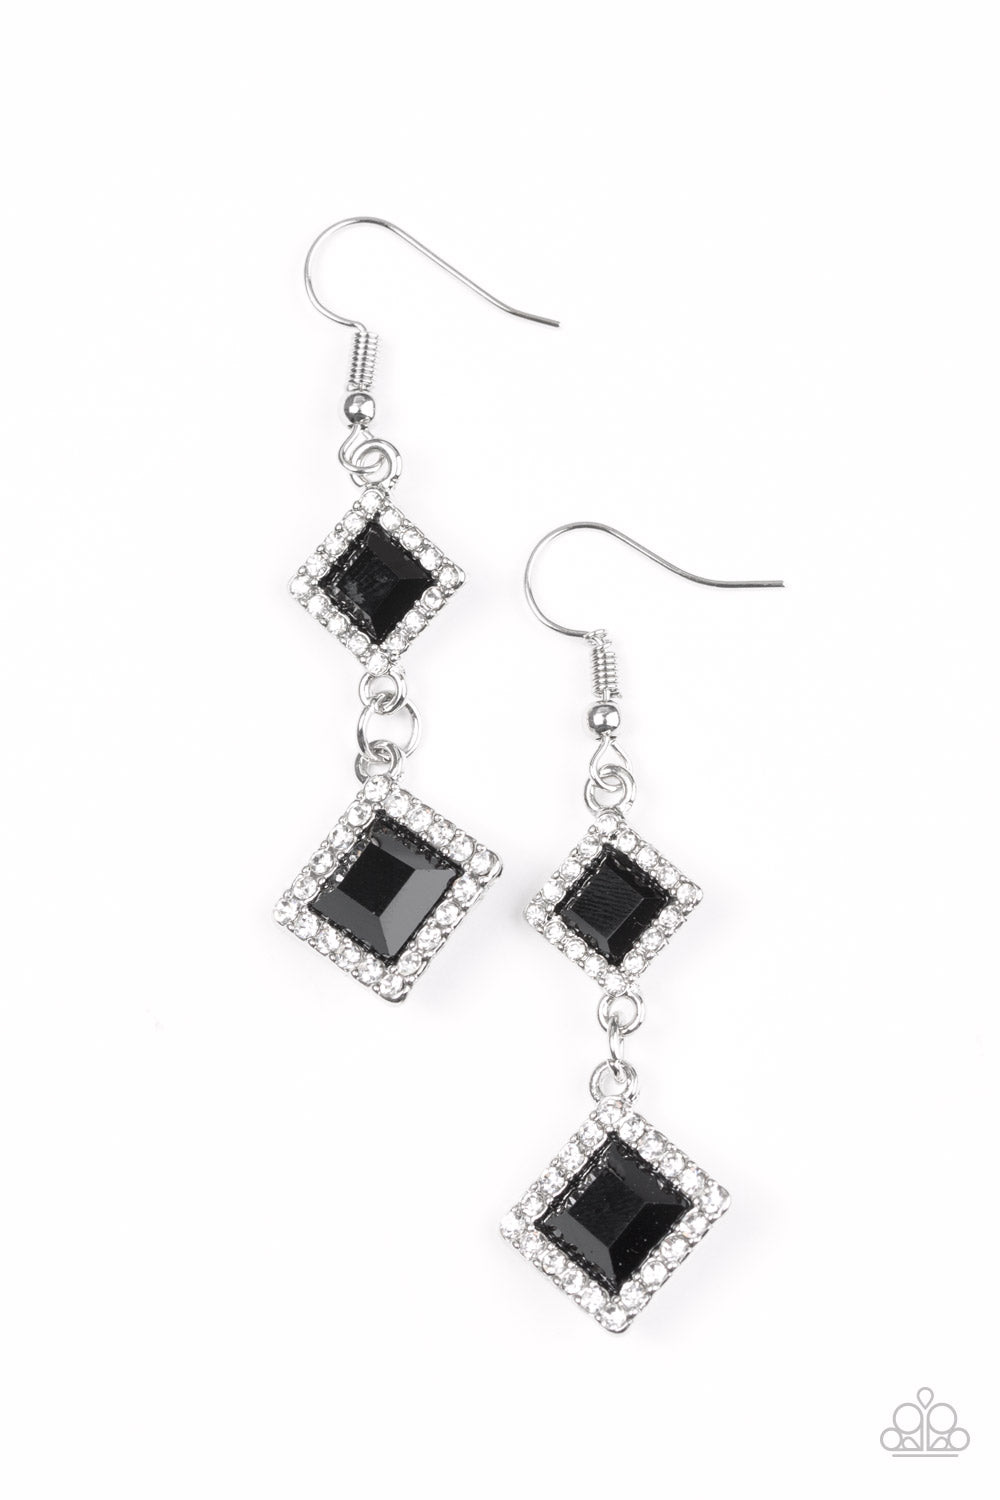 Paparazzi Accessories Timelessly Times Square - Black Earrings 